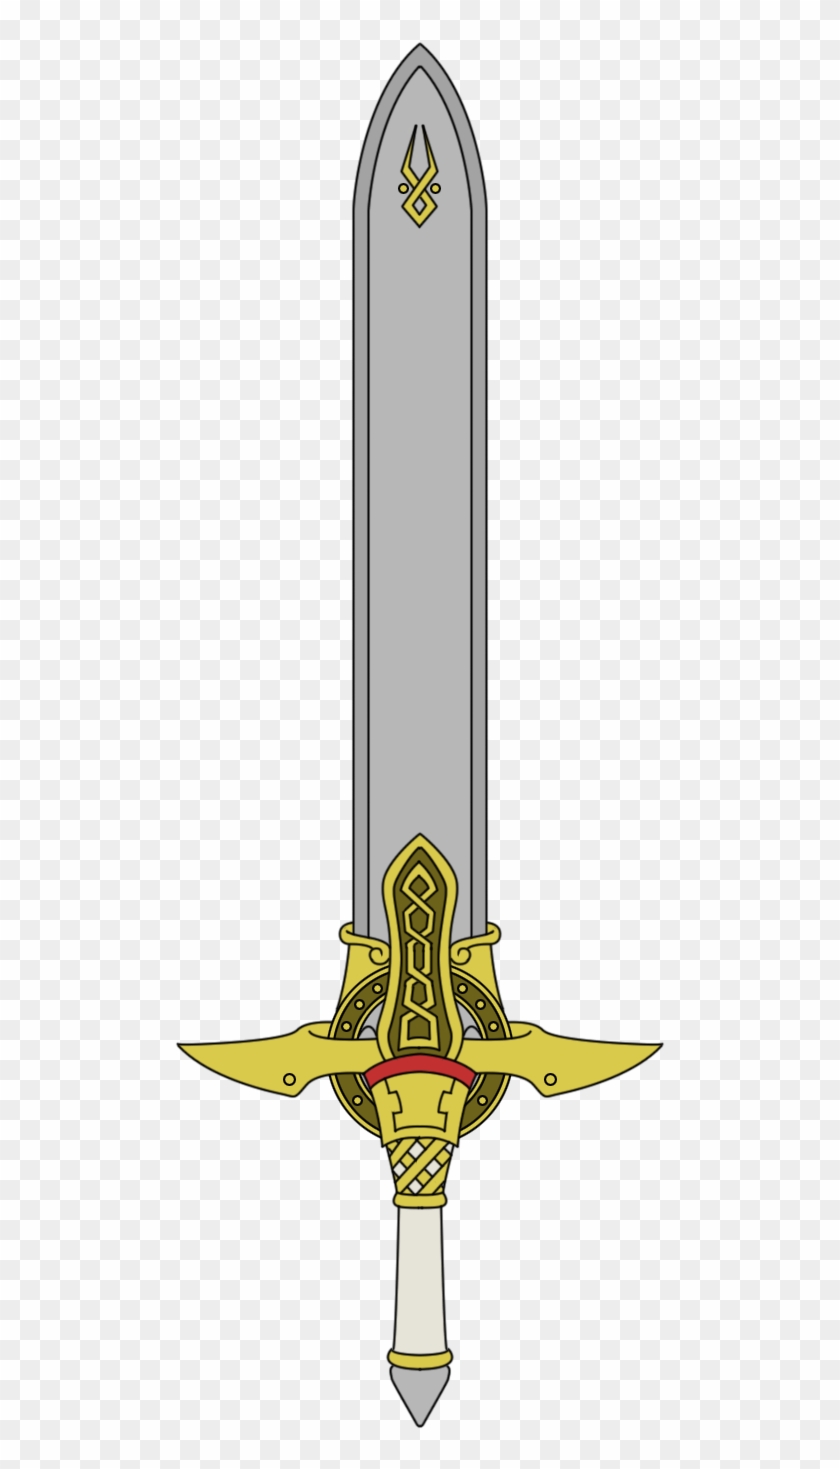 Click For Larger Image - Sword Clipart #4691844